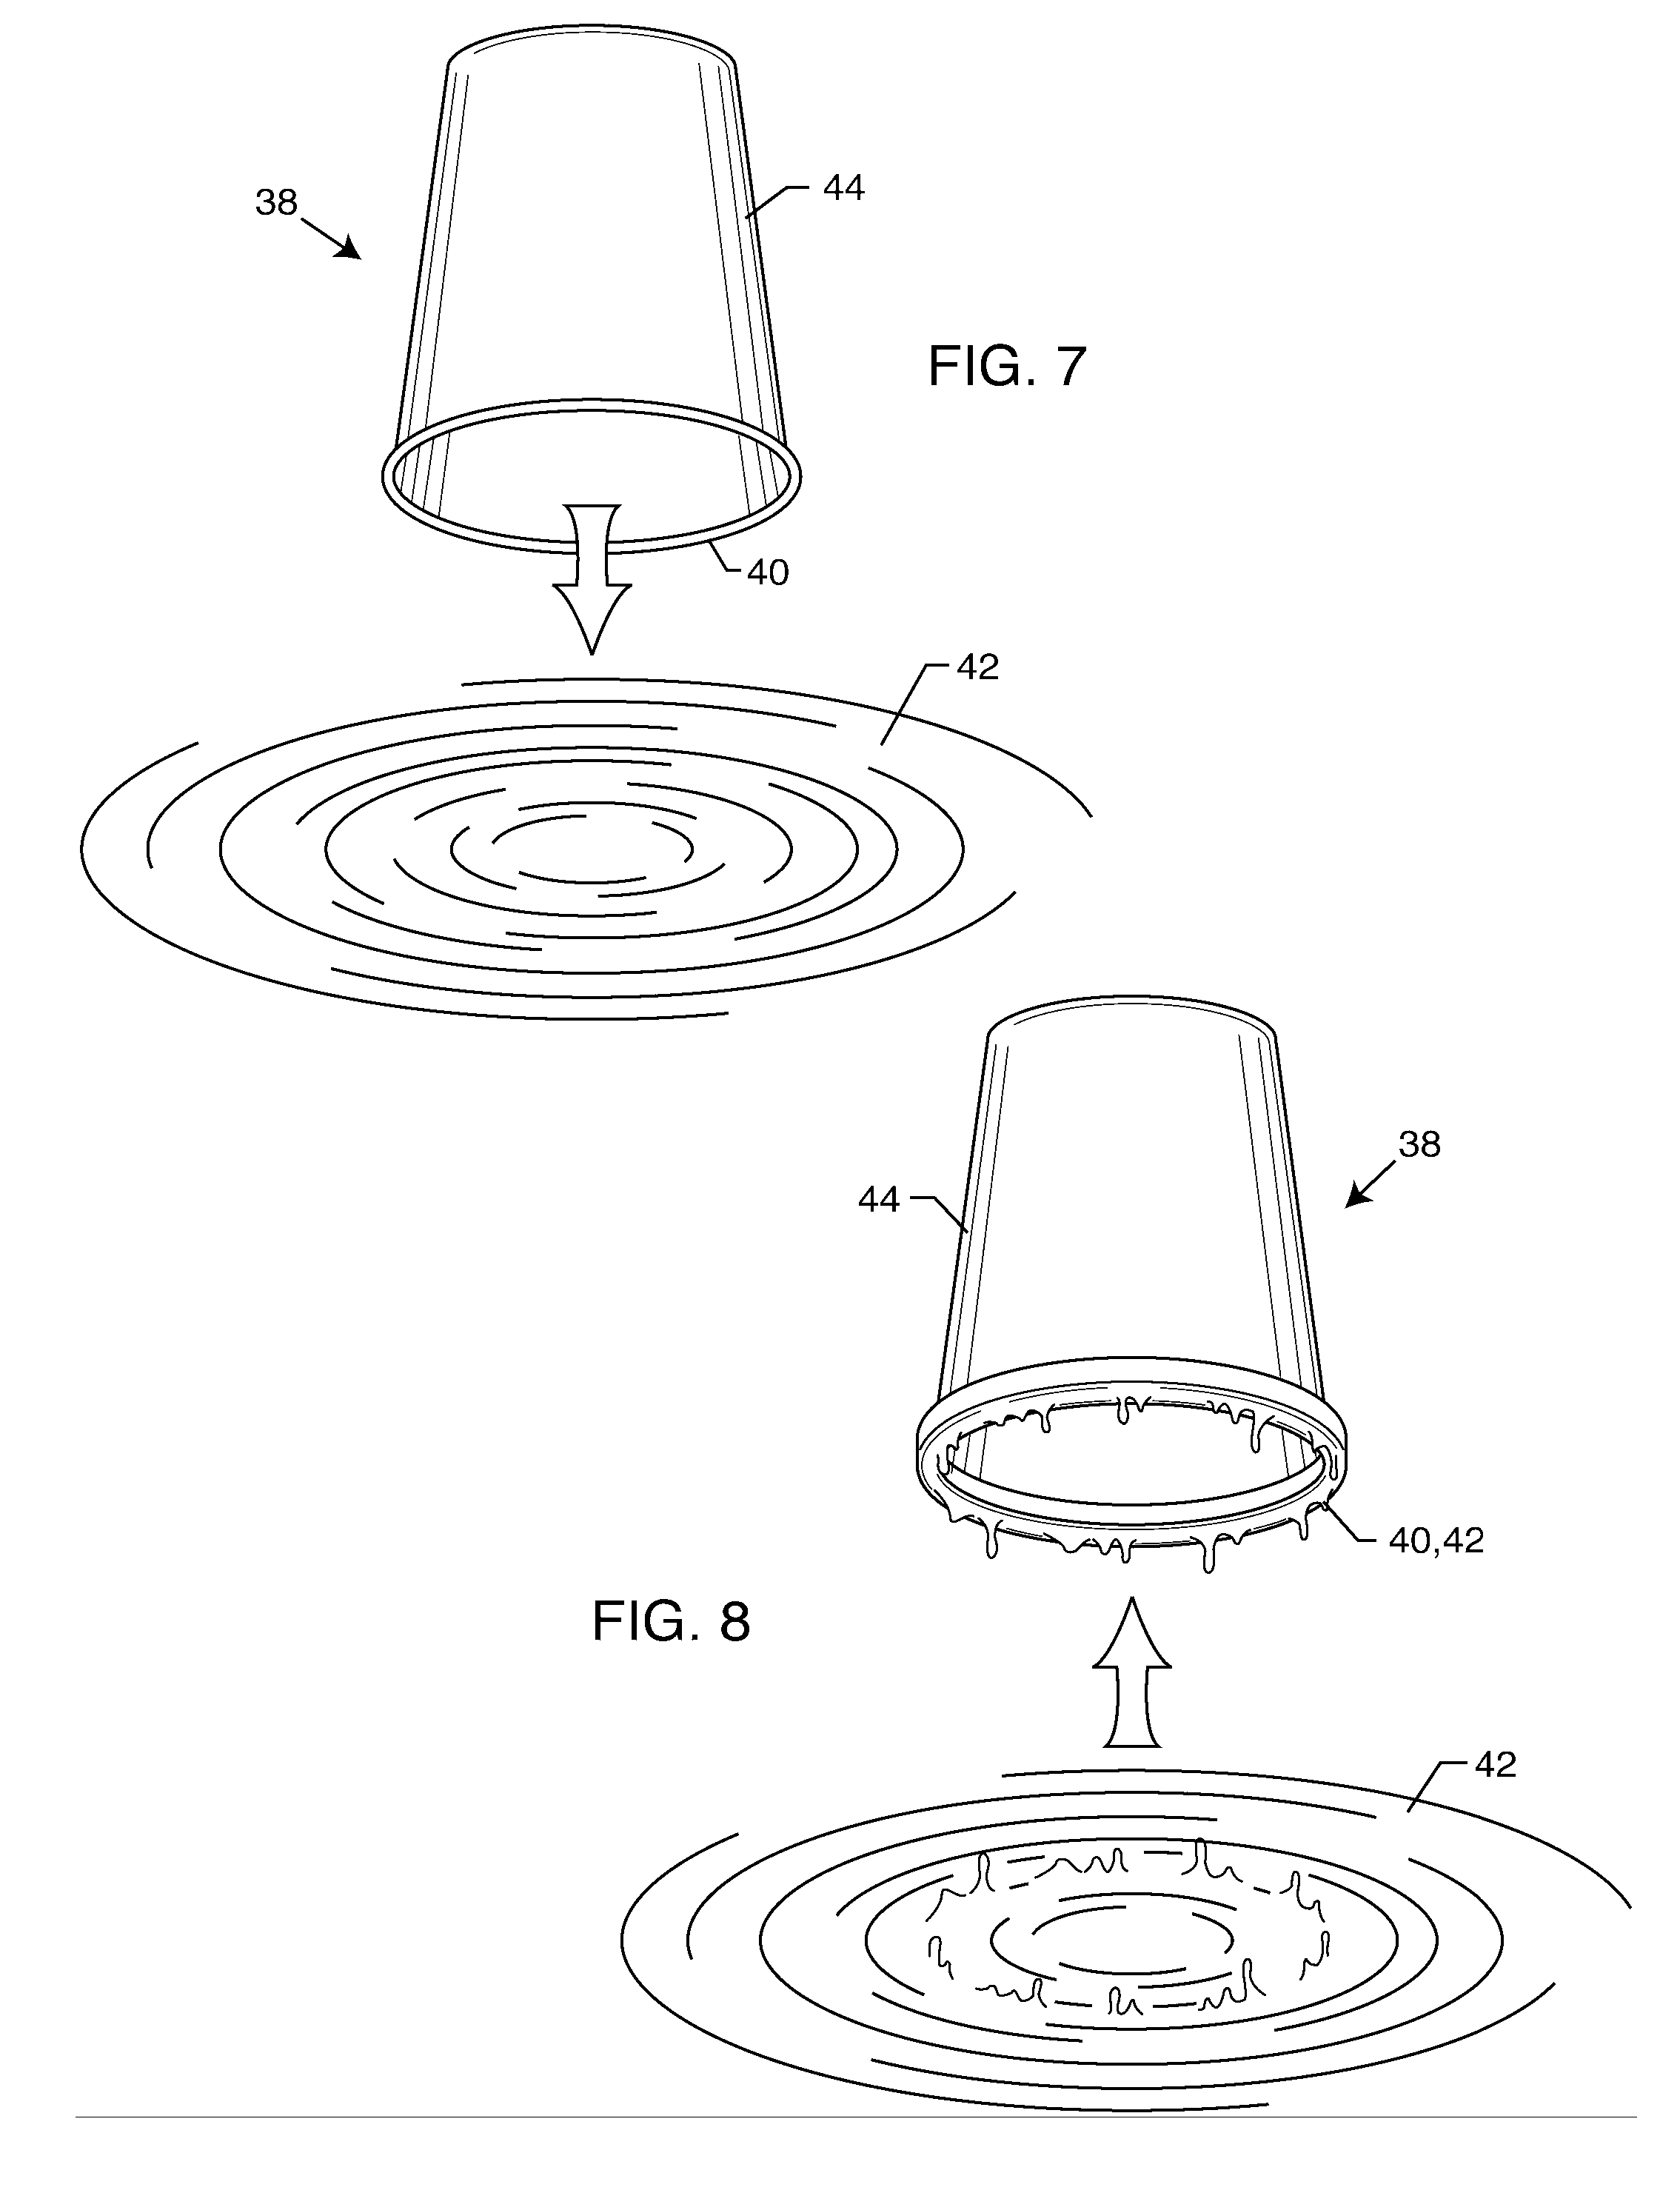 Candy-coated beverage container and related method